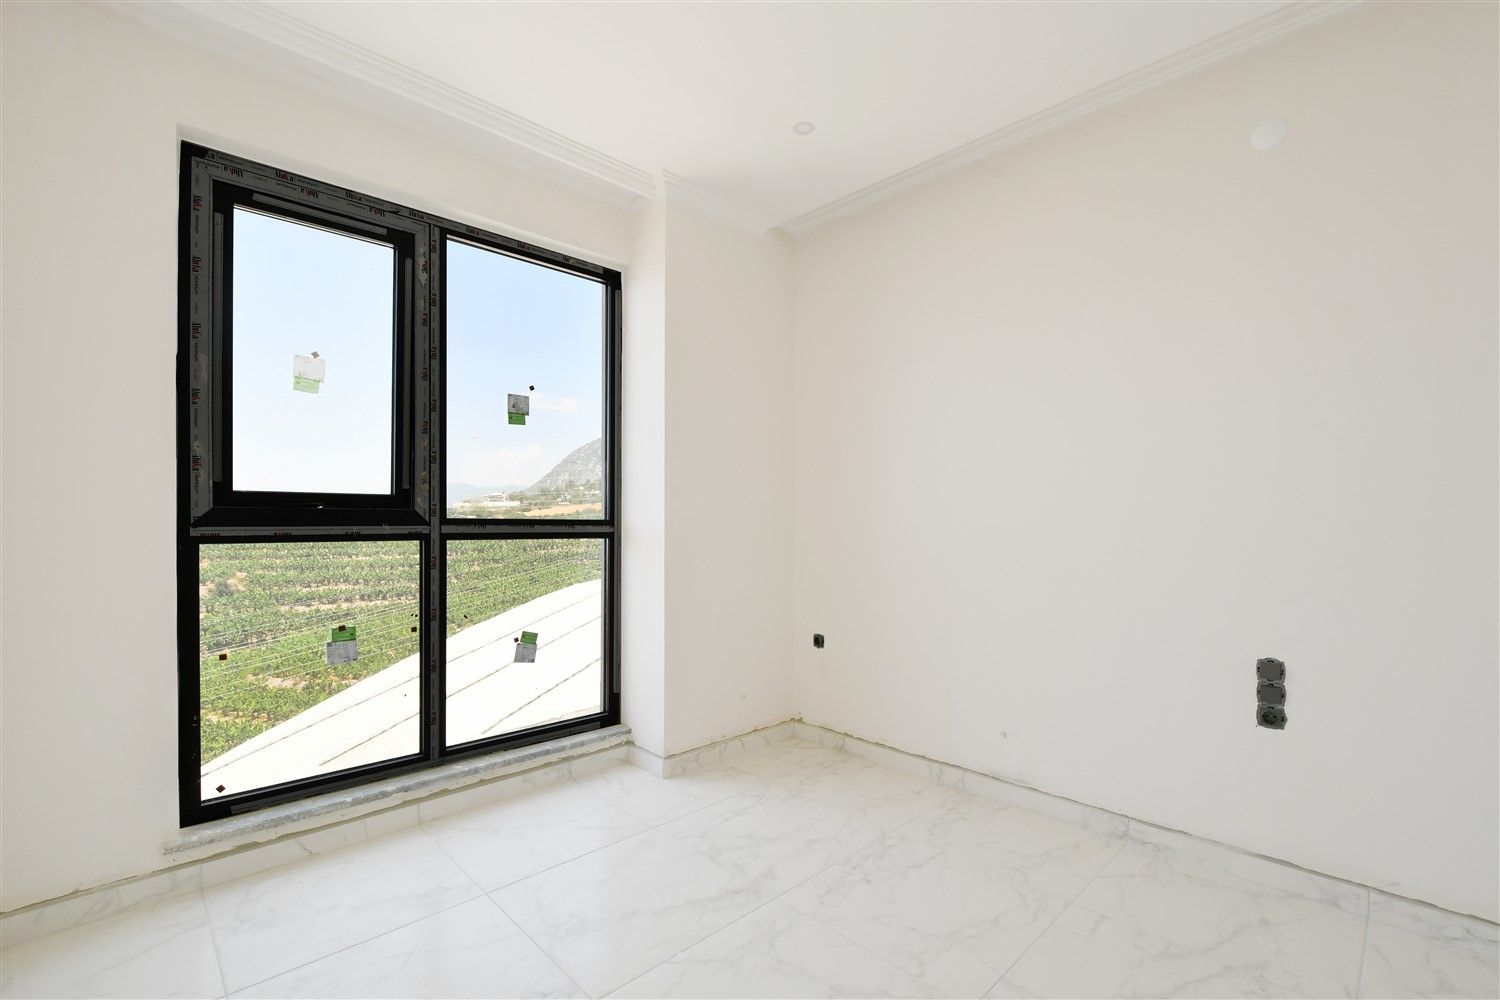 Apartment at the final stage of construction in Mahmutlar